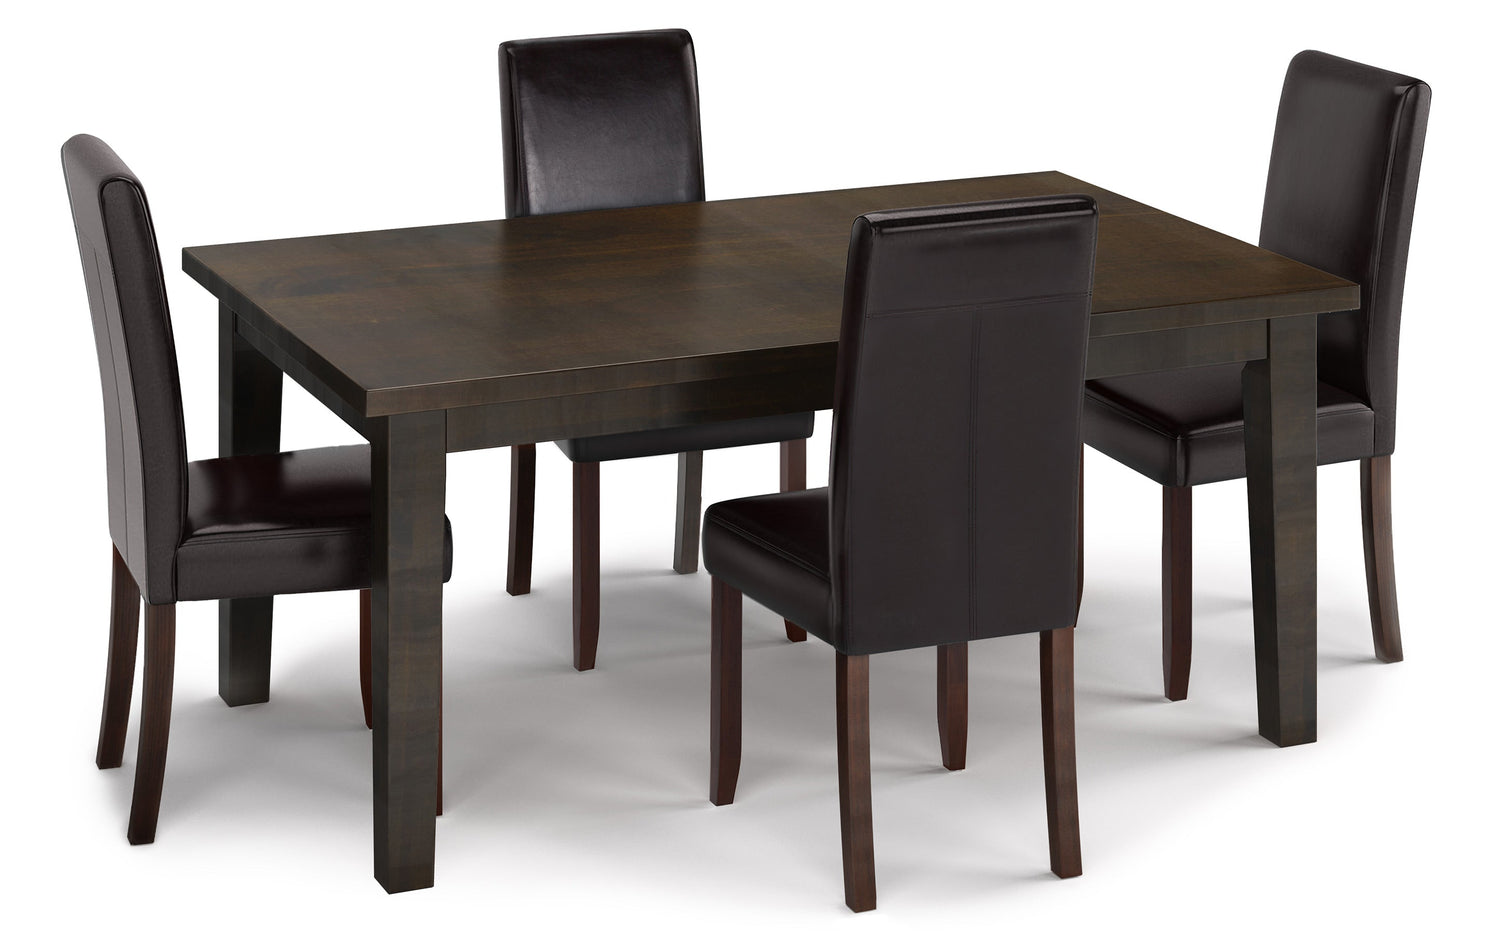 Tanners Brown Vegan Leather | Acadian 5 Piece Dining Set